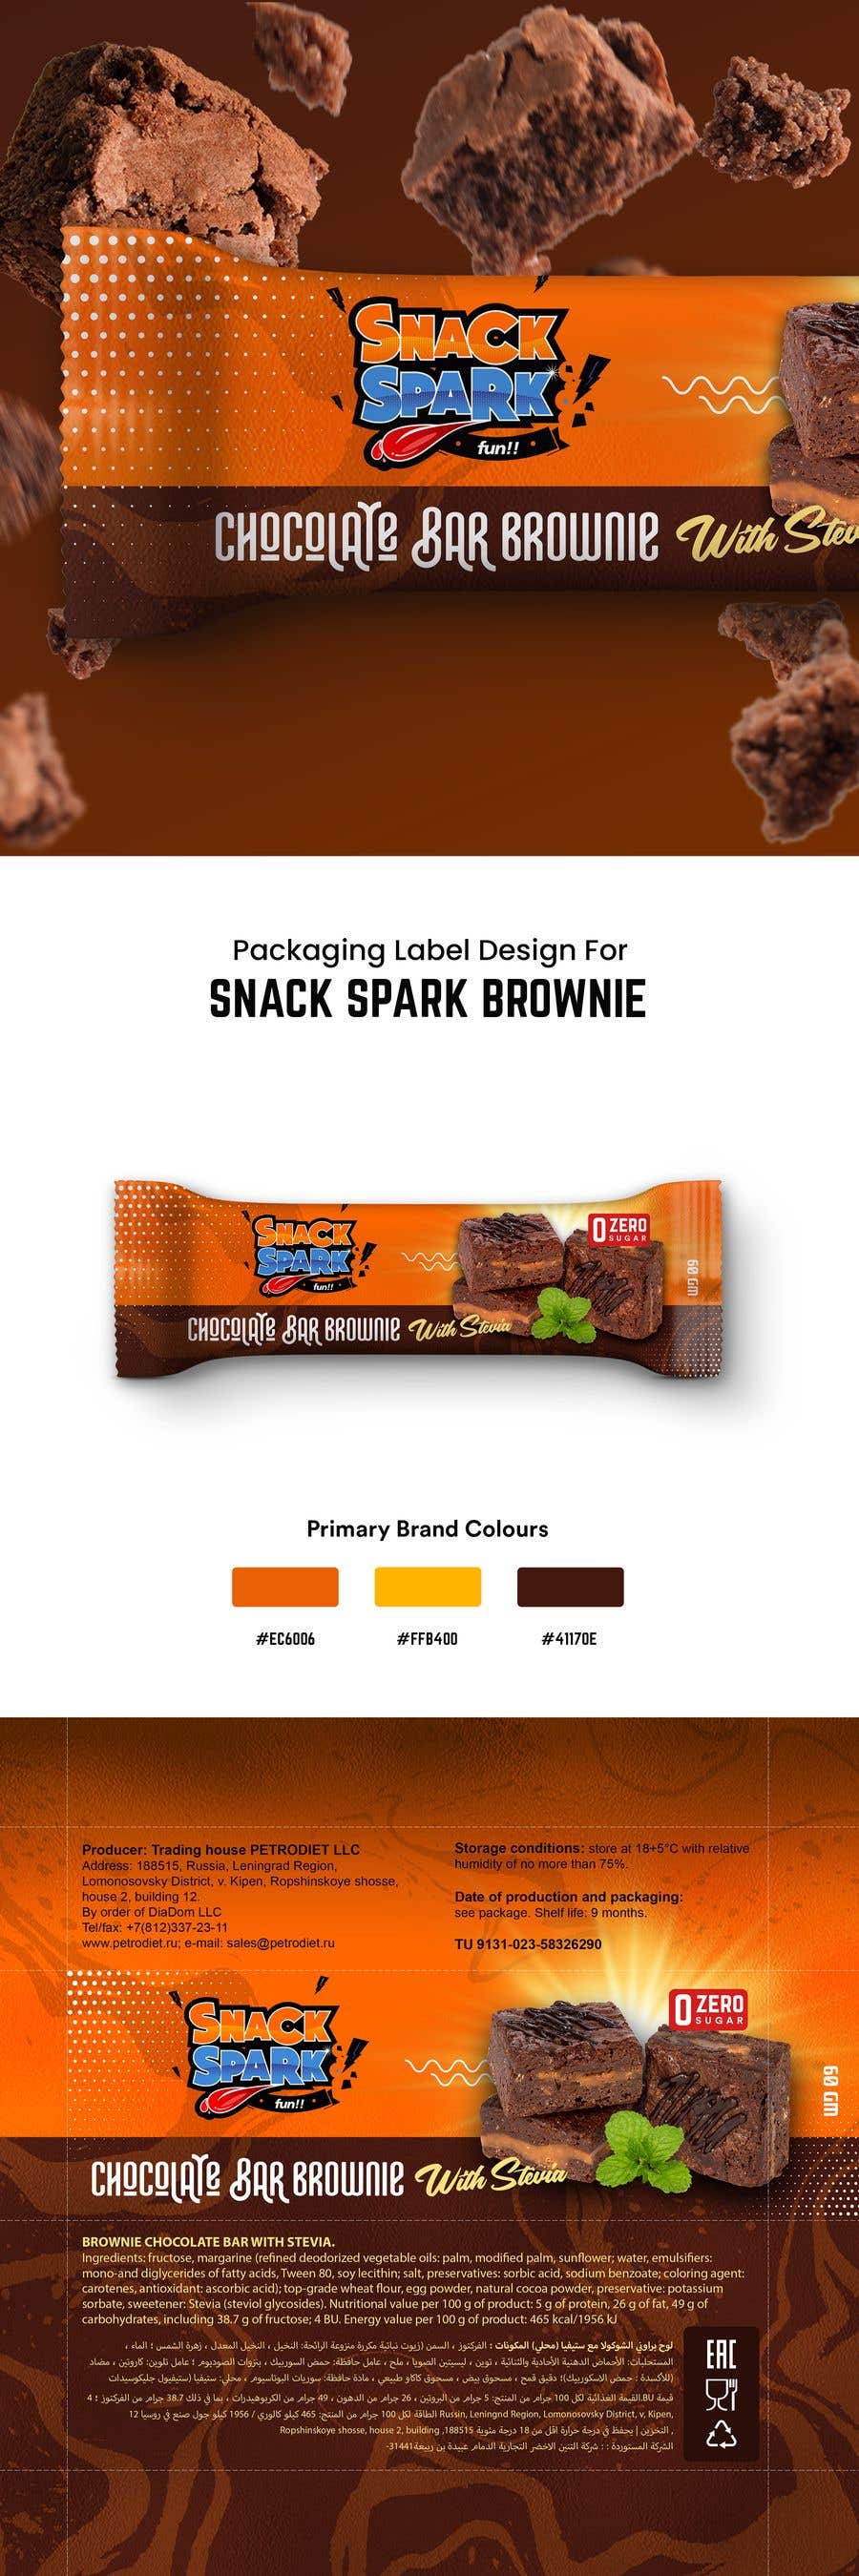 Proposition n°392 du concours                                                 spark snack brownie
                                            